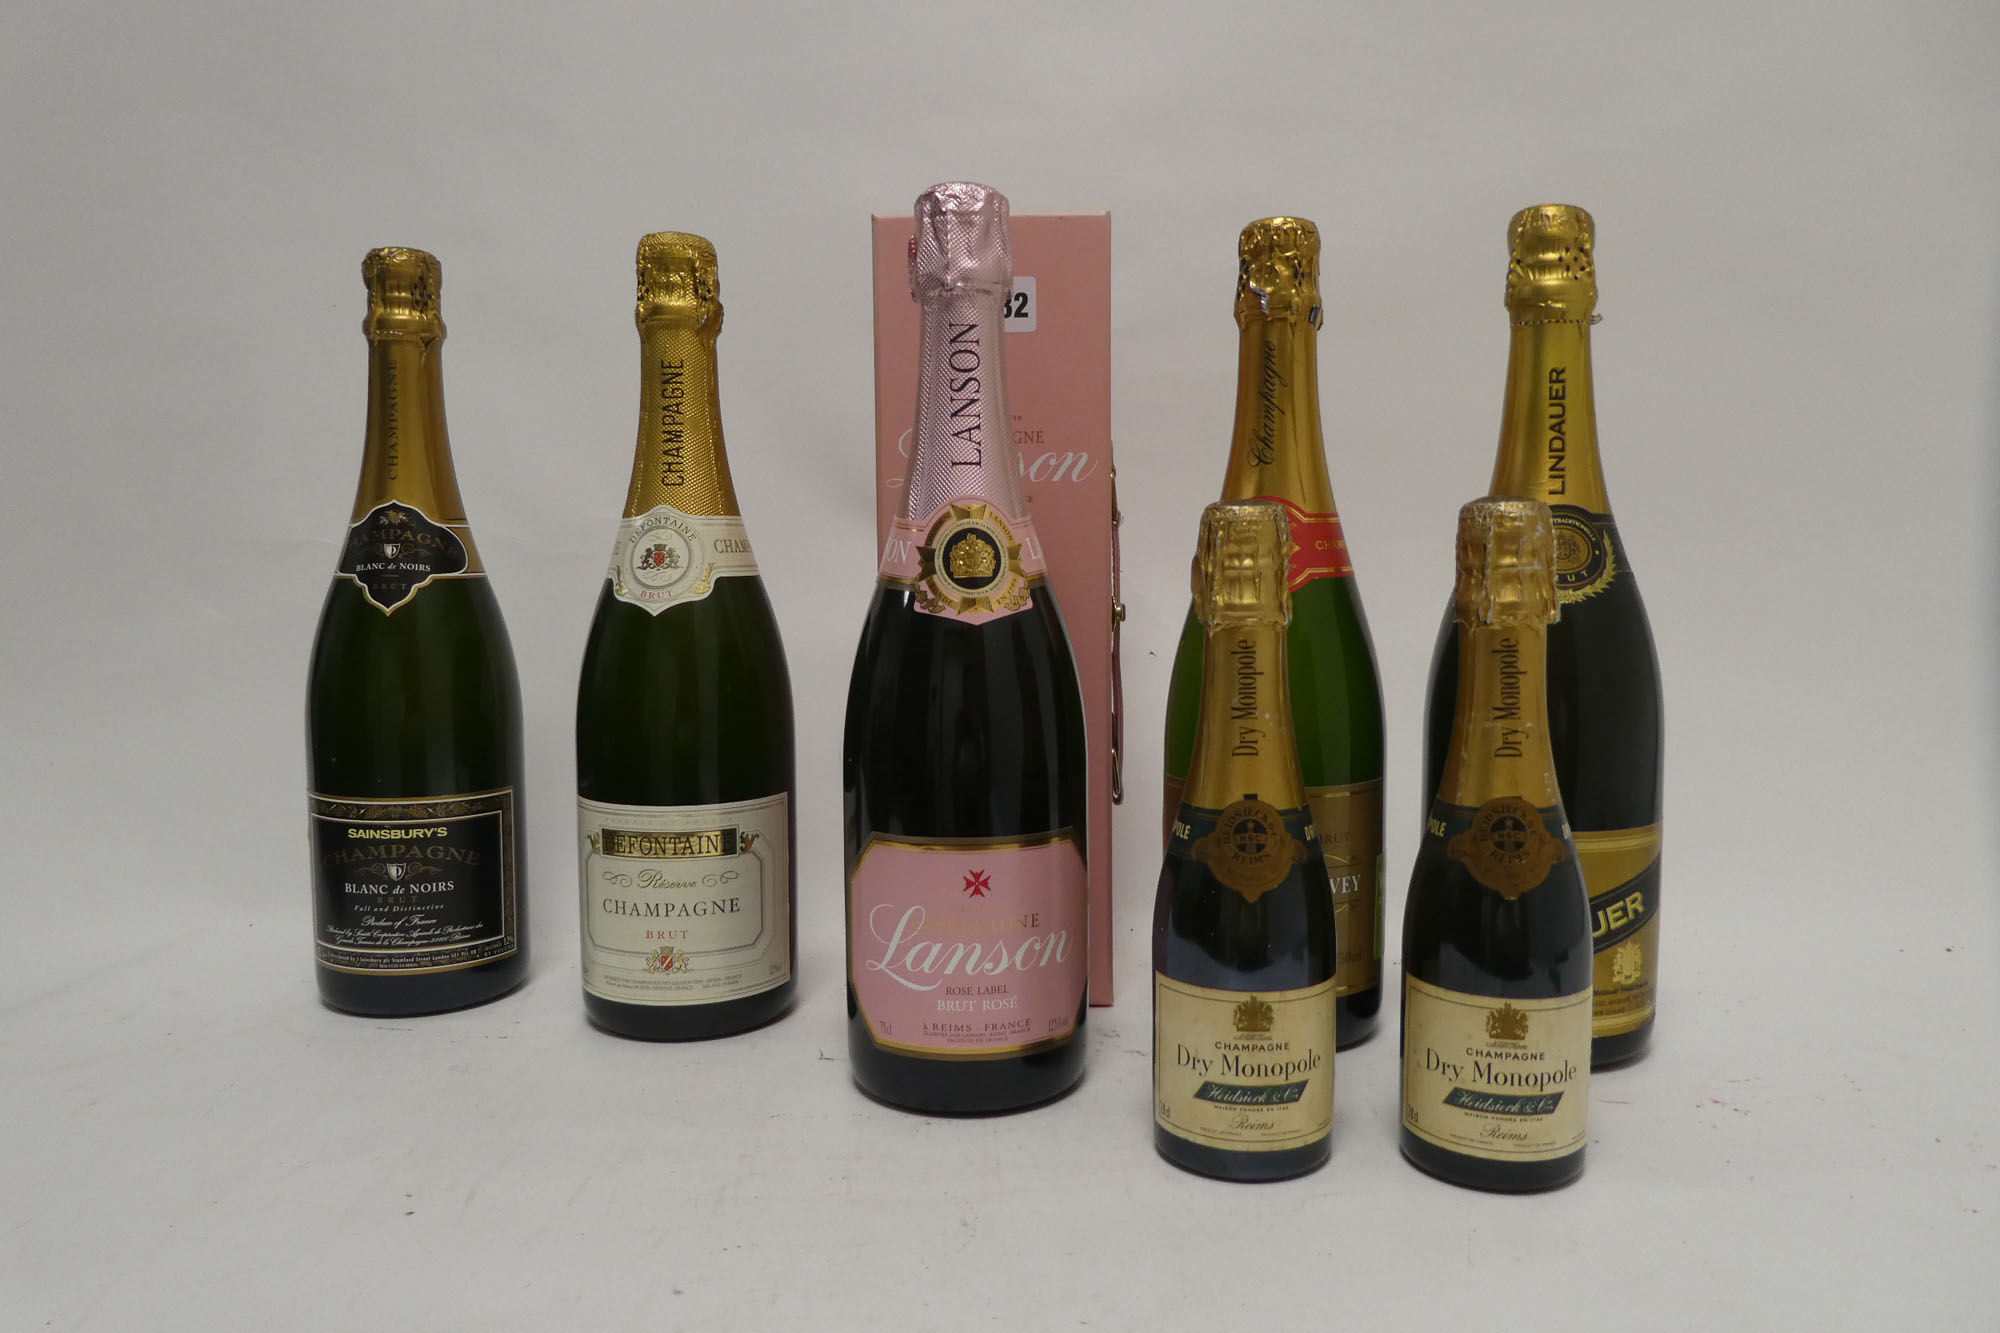 5 bottles & 2x 20cl, 1x Lanson Rose Label Brut Rose Champagne with box,